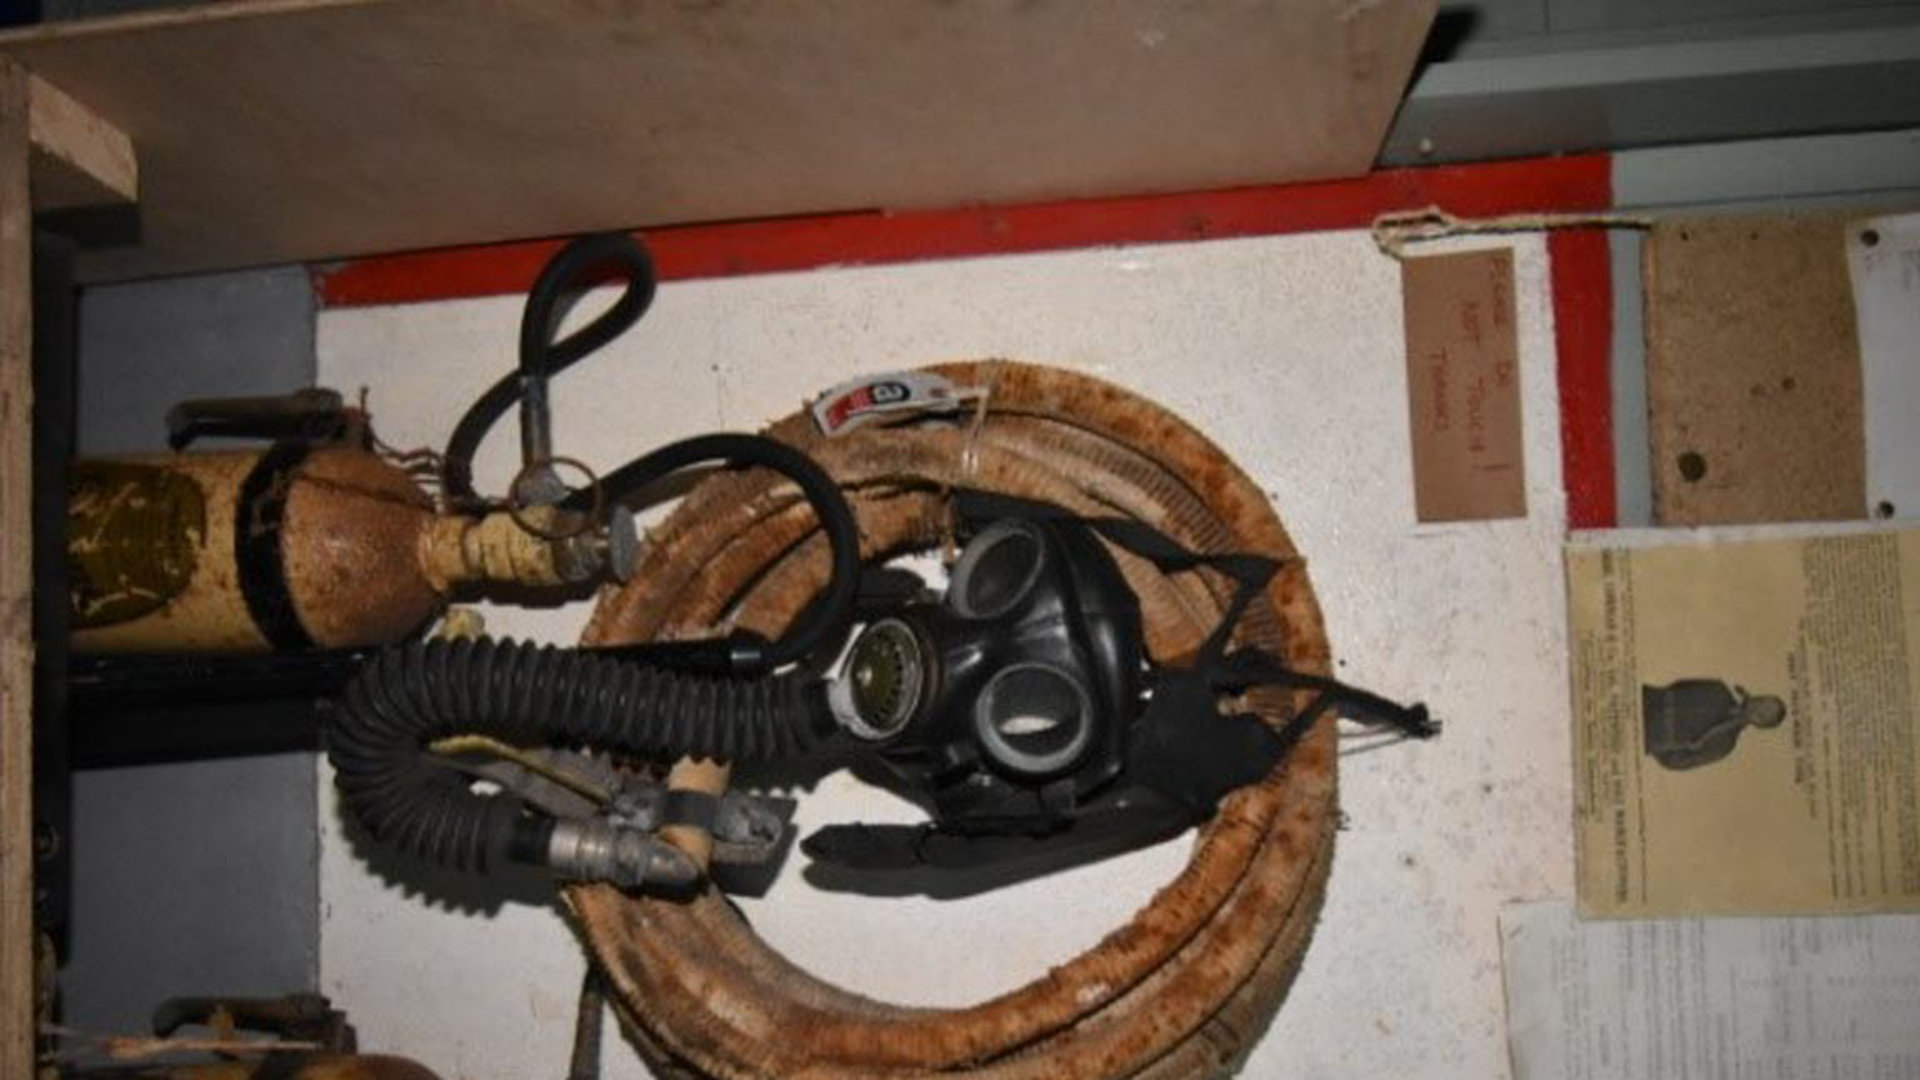 Hoses used in historic breathing apparatus